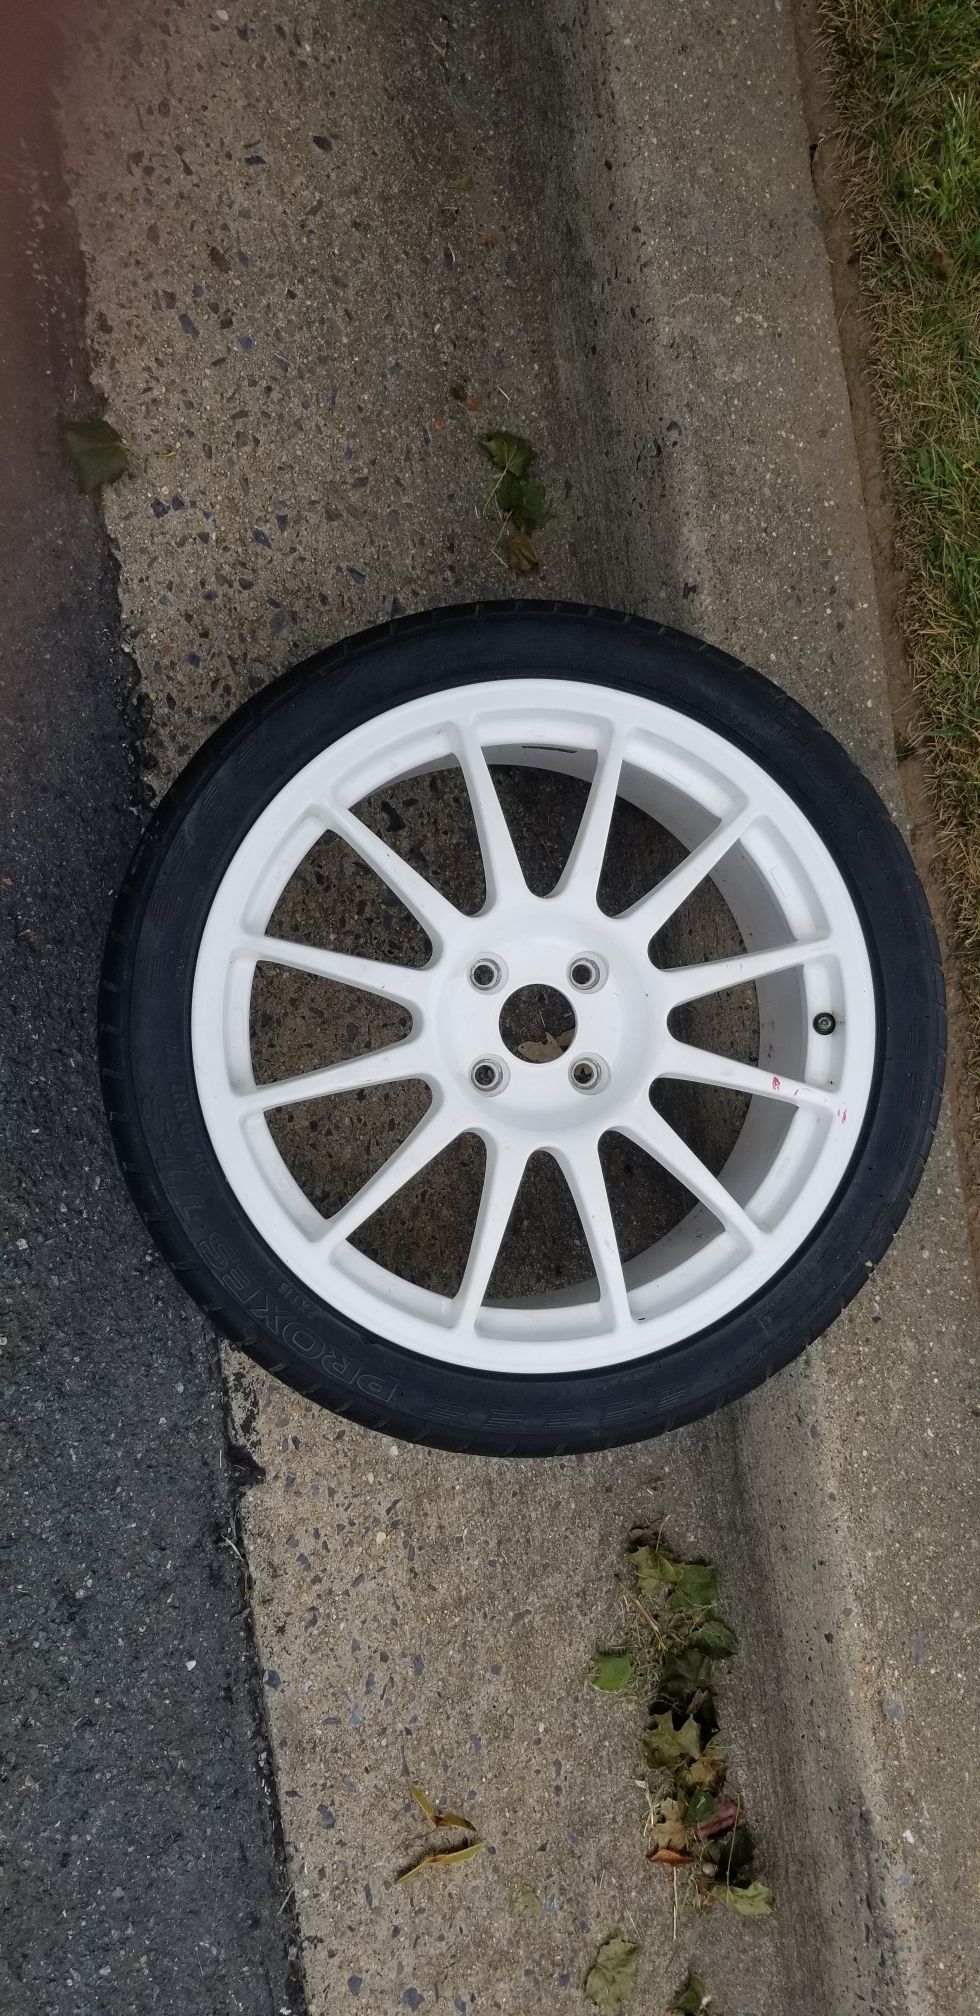 ONE 17 in wheel and tire 215 40 zr 17 white wheel 4x100 bolt pattern civic spare